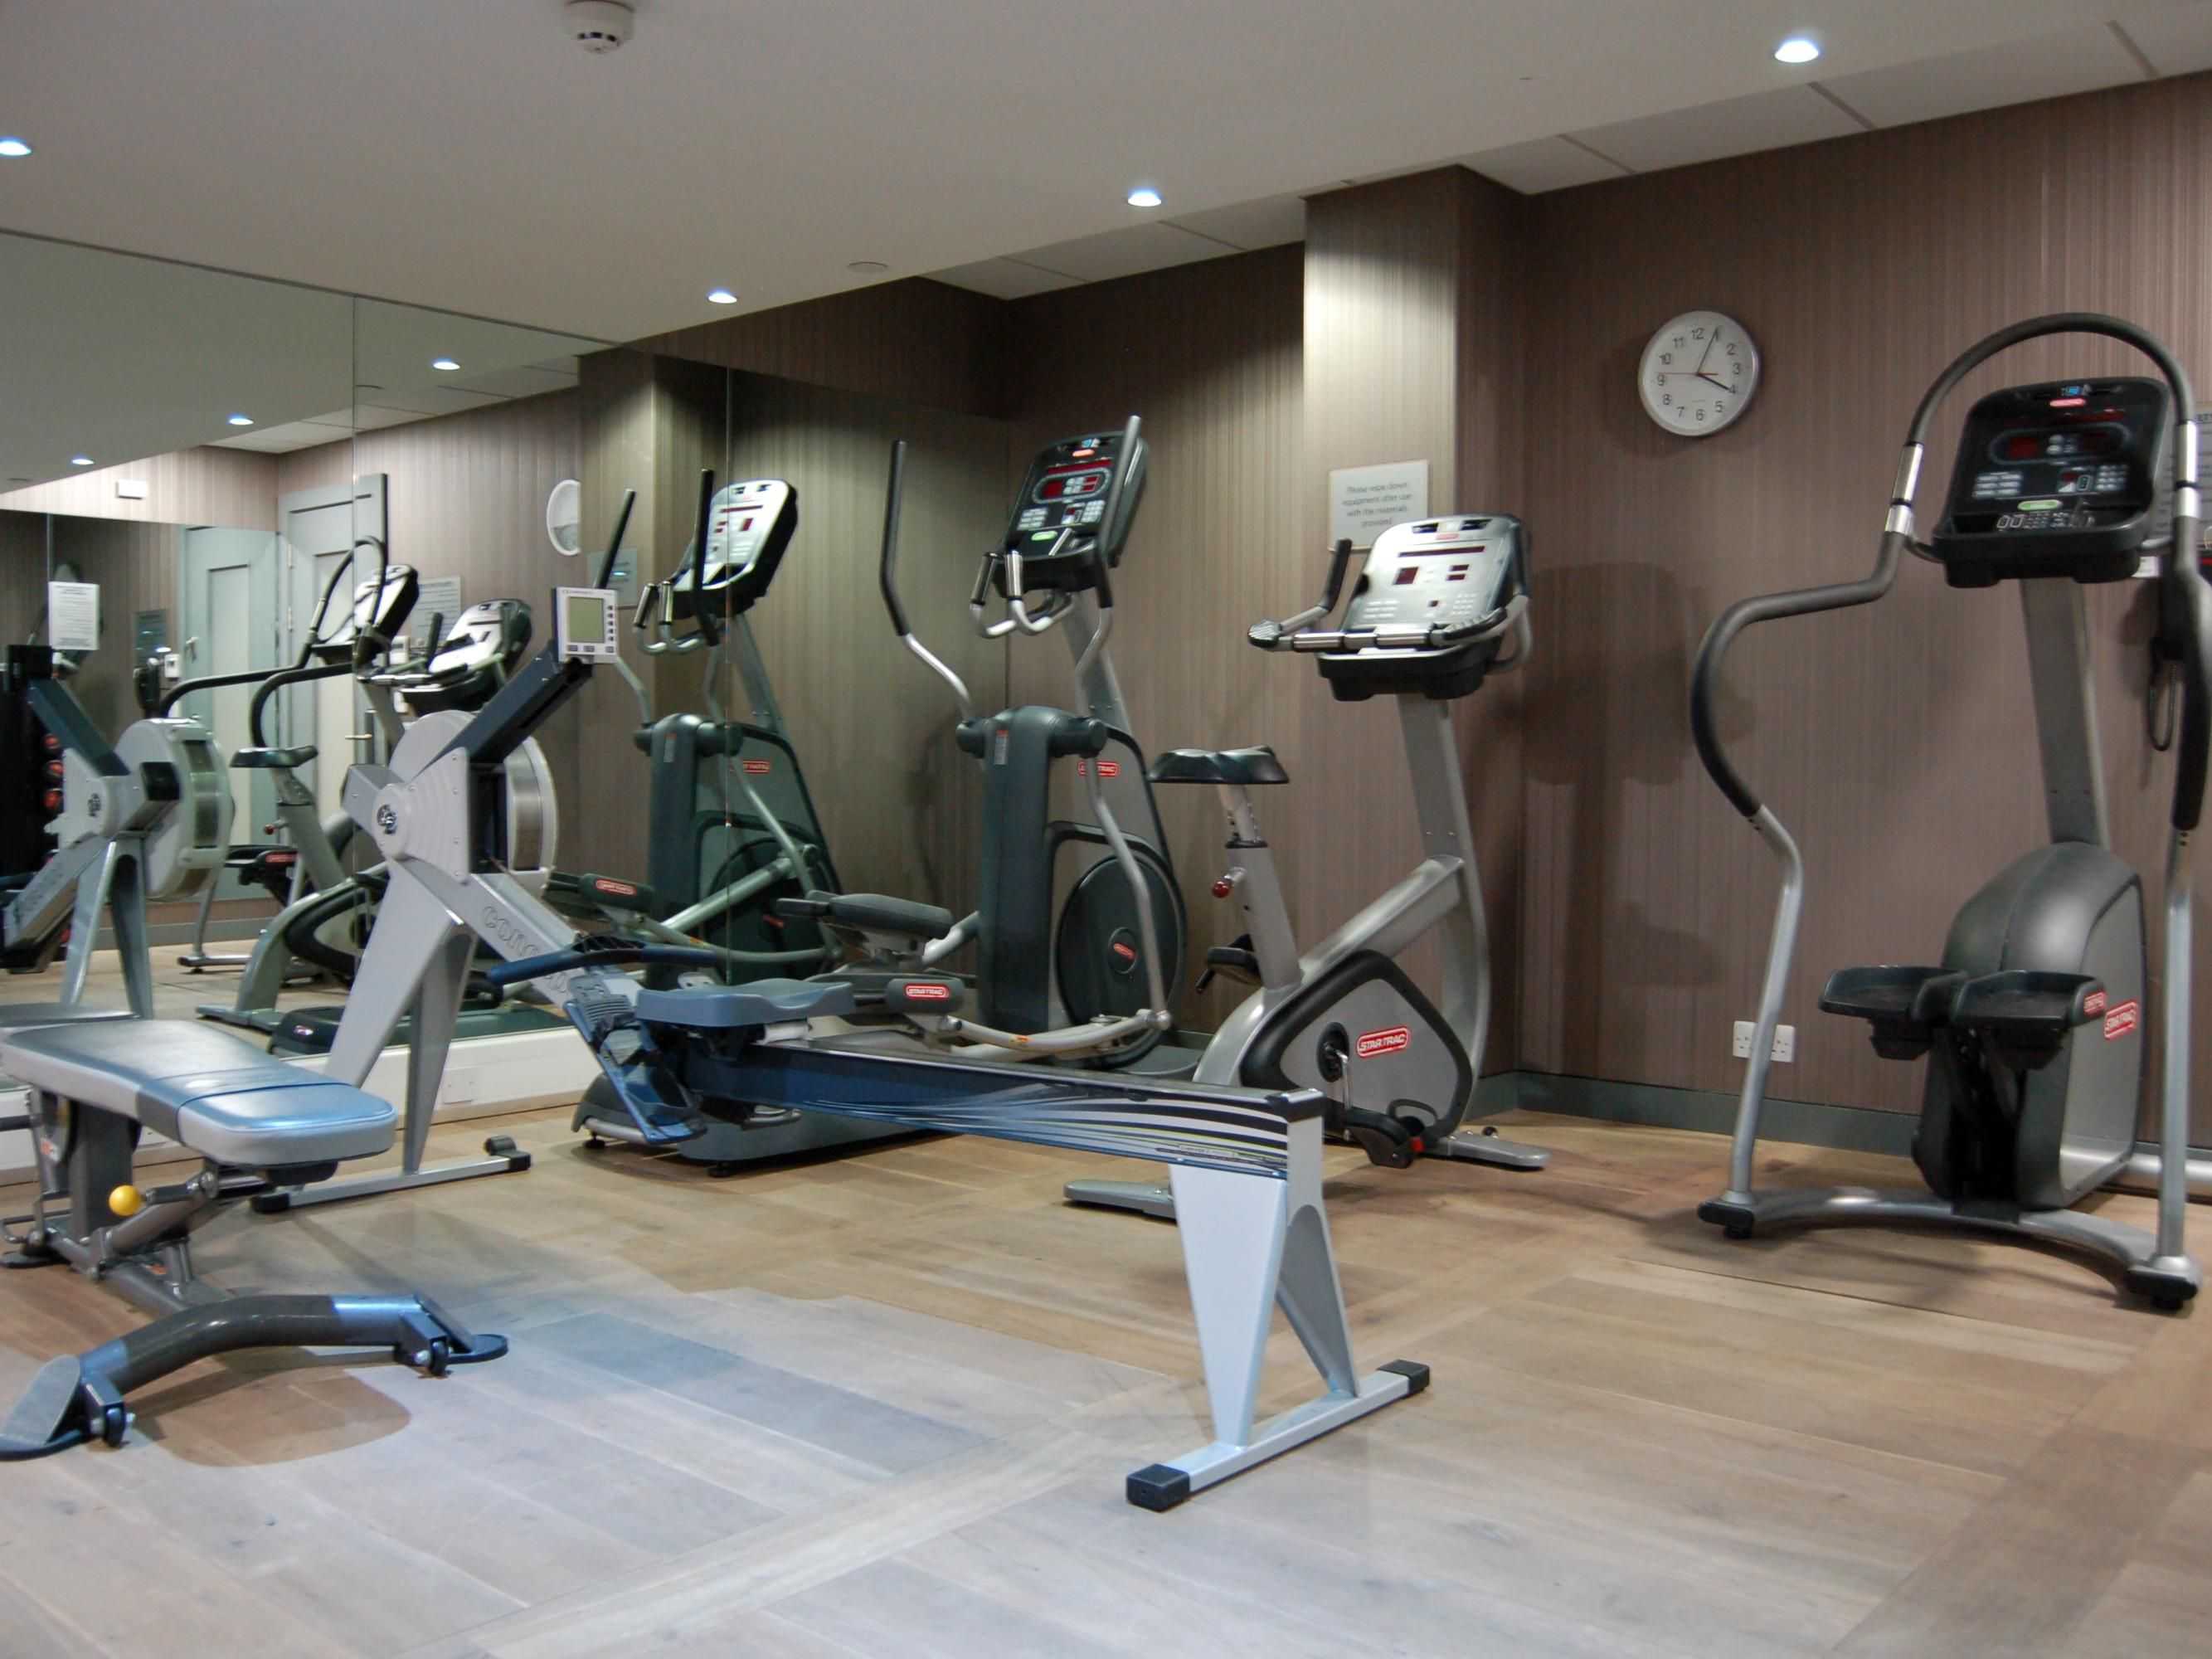 Blythswood Square Hotel fitness center photo